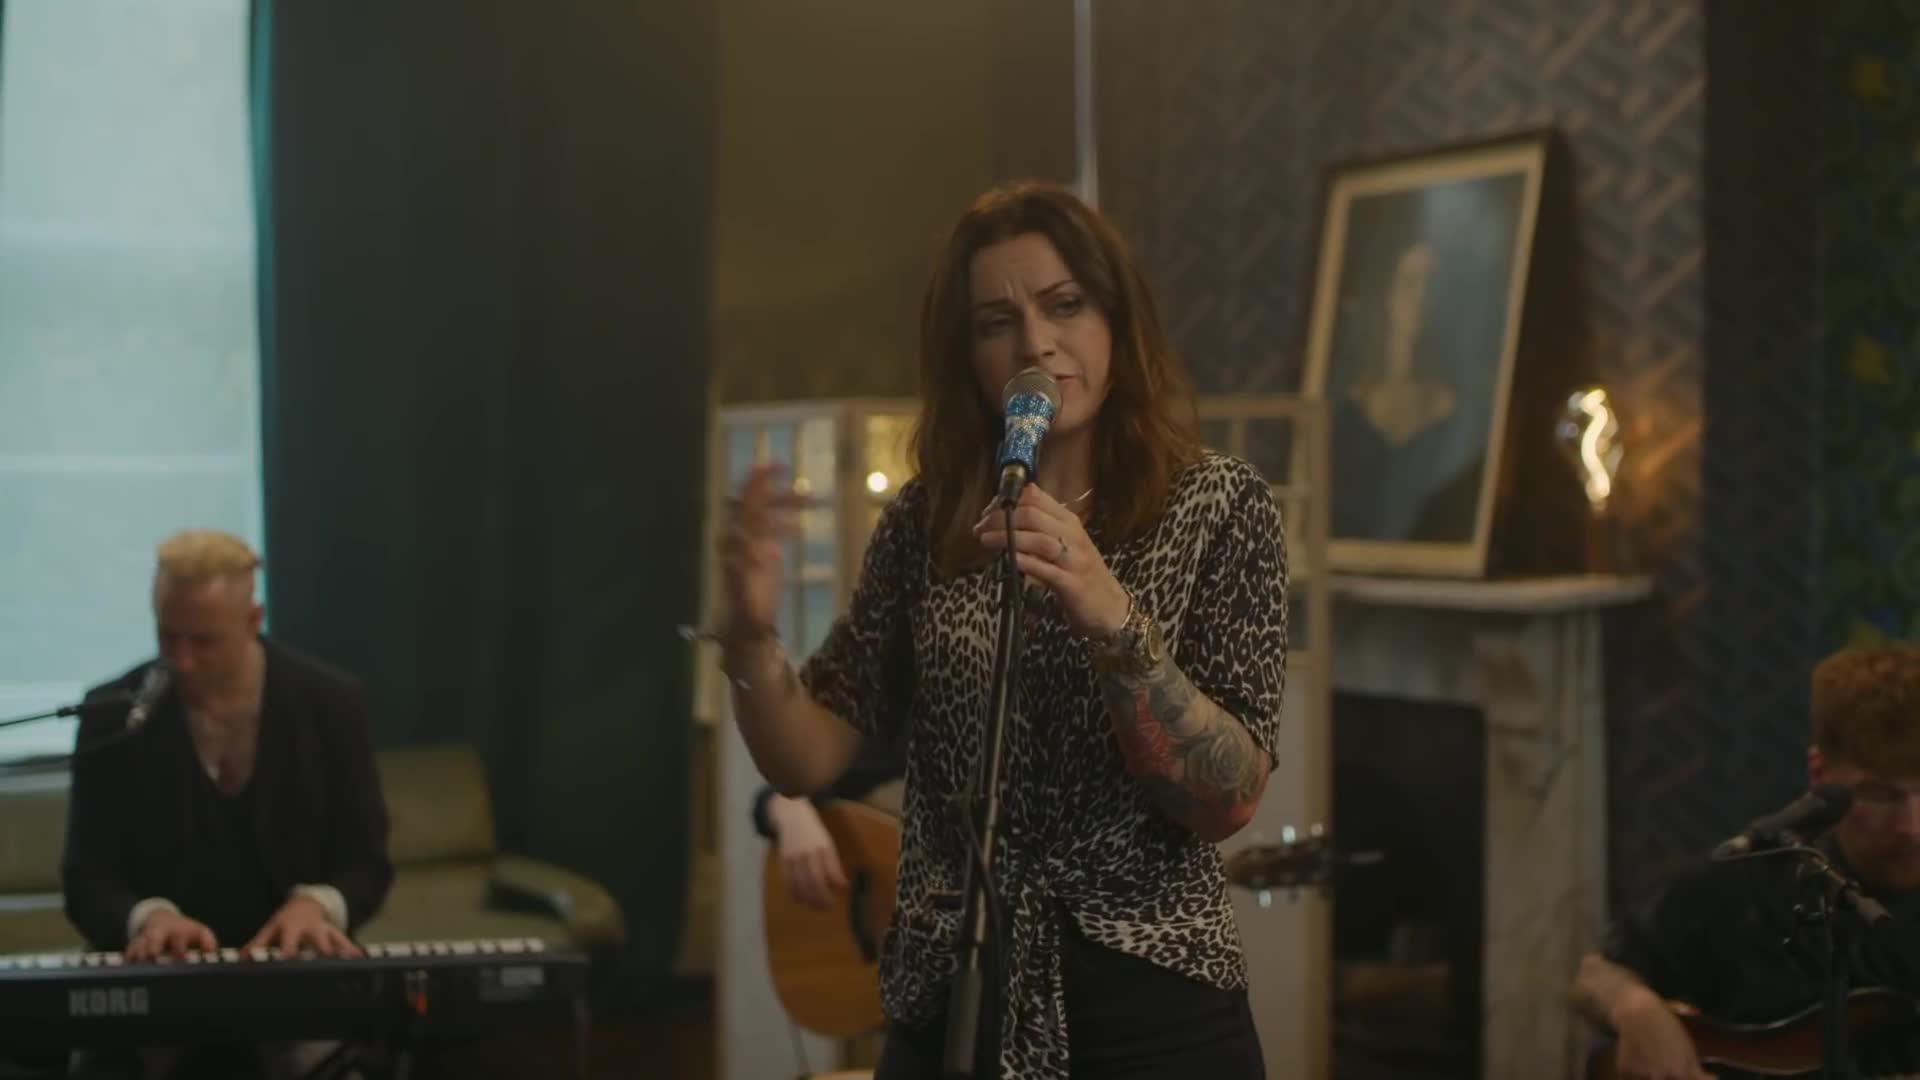 Amy Macdonald - The Human Demands (The Roost Acoustic Session)